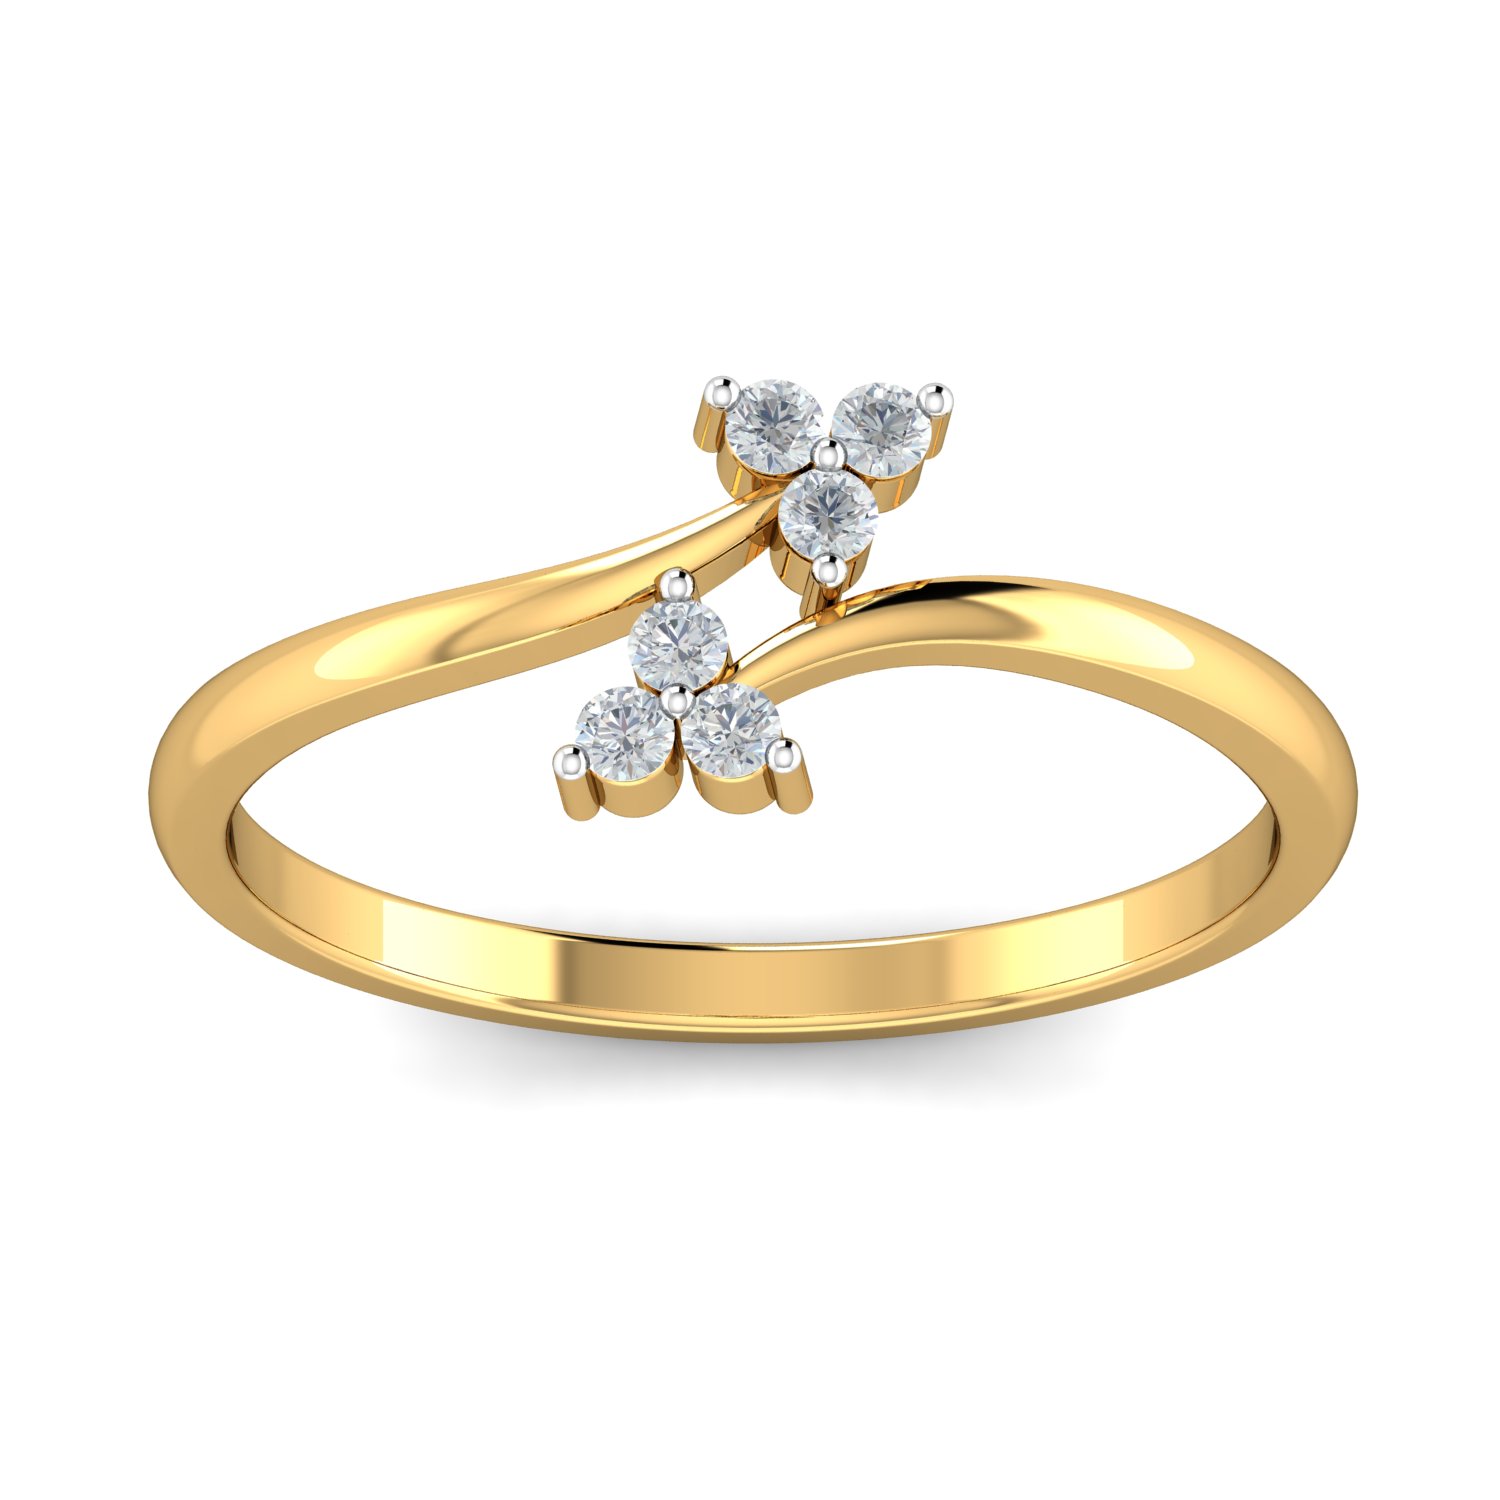 Buy MALABAR GOLD AND DIAMONDS Mens Mine Diamond Ring - Size 23 | Shoppers  Stop